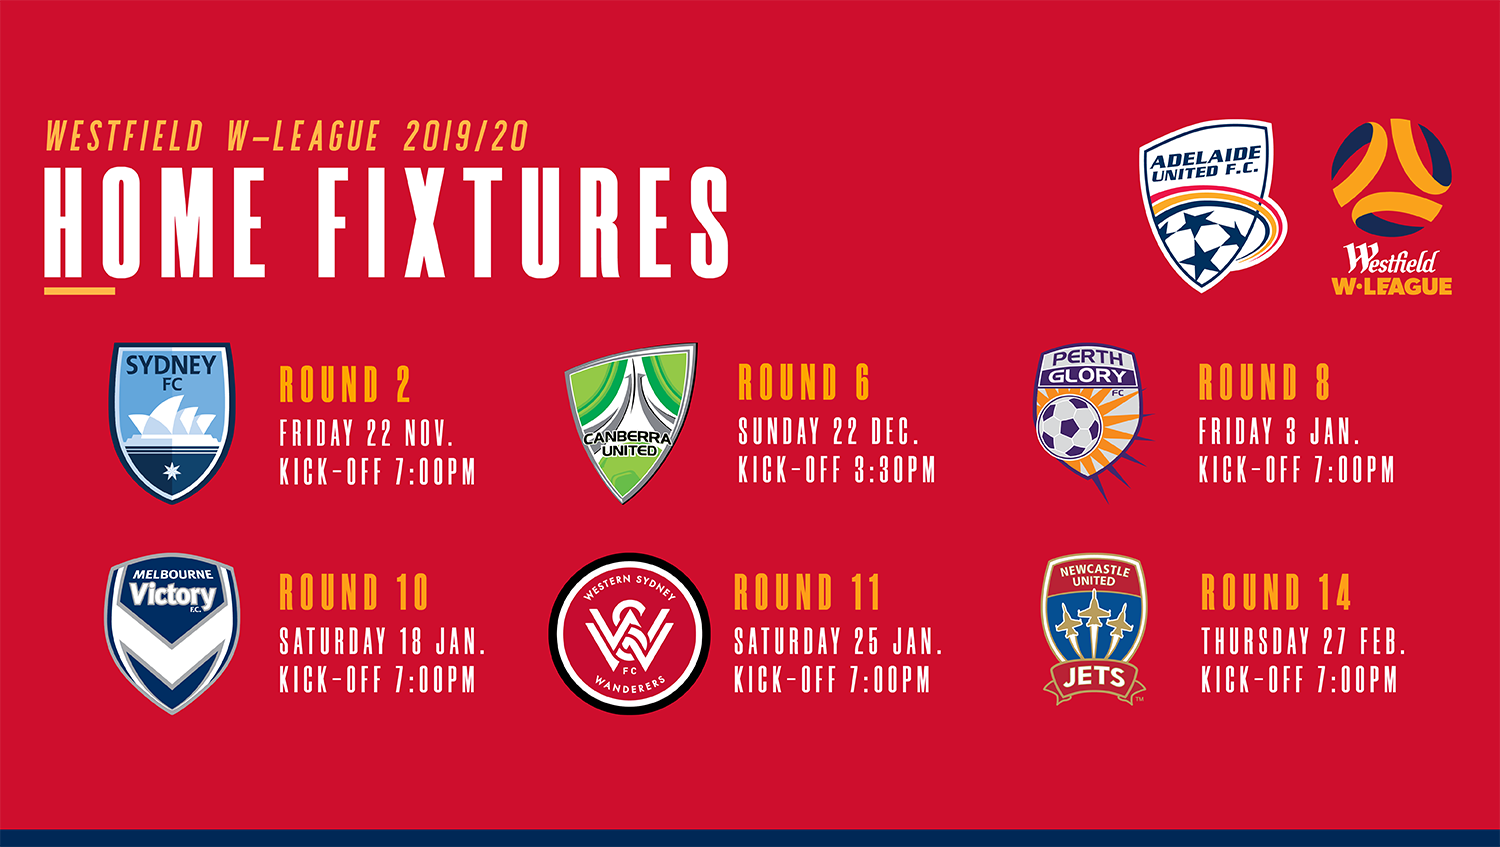 Adelaide United Westfield W-League 2019/20 home games